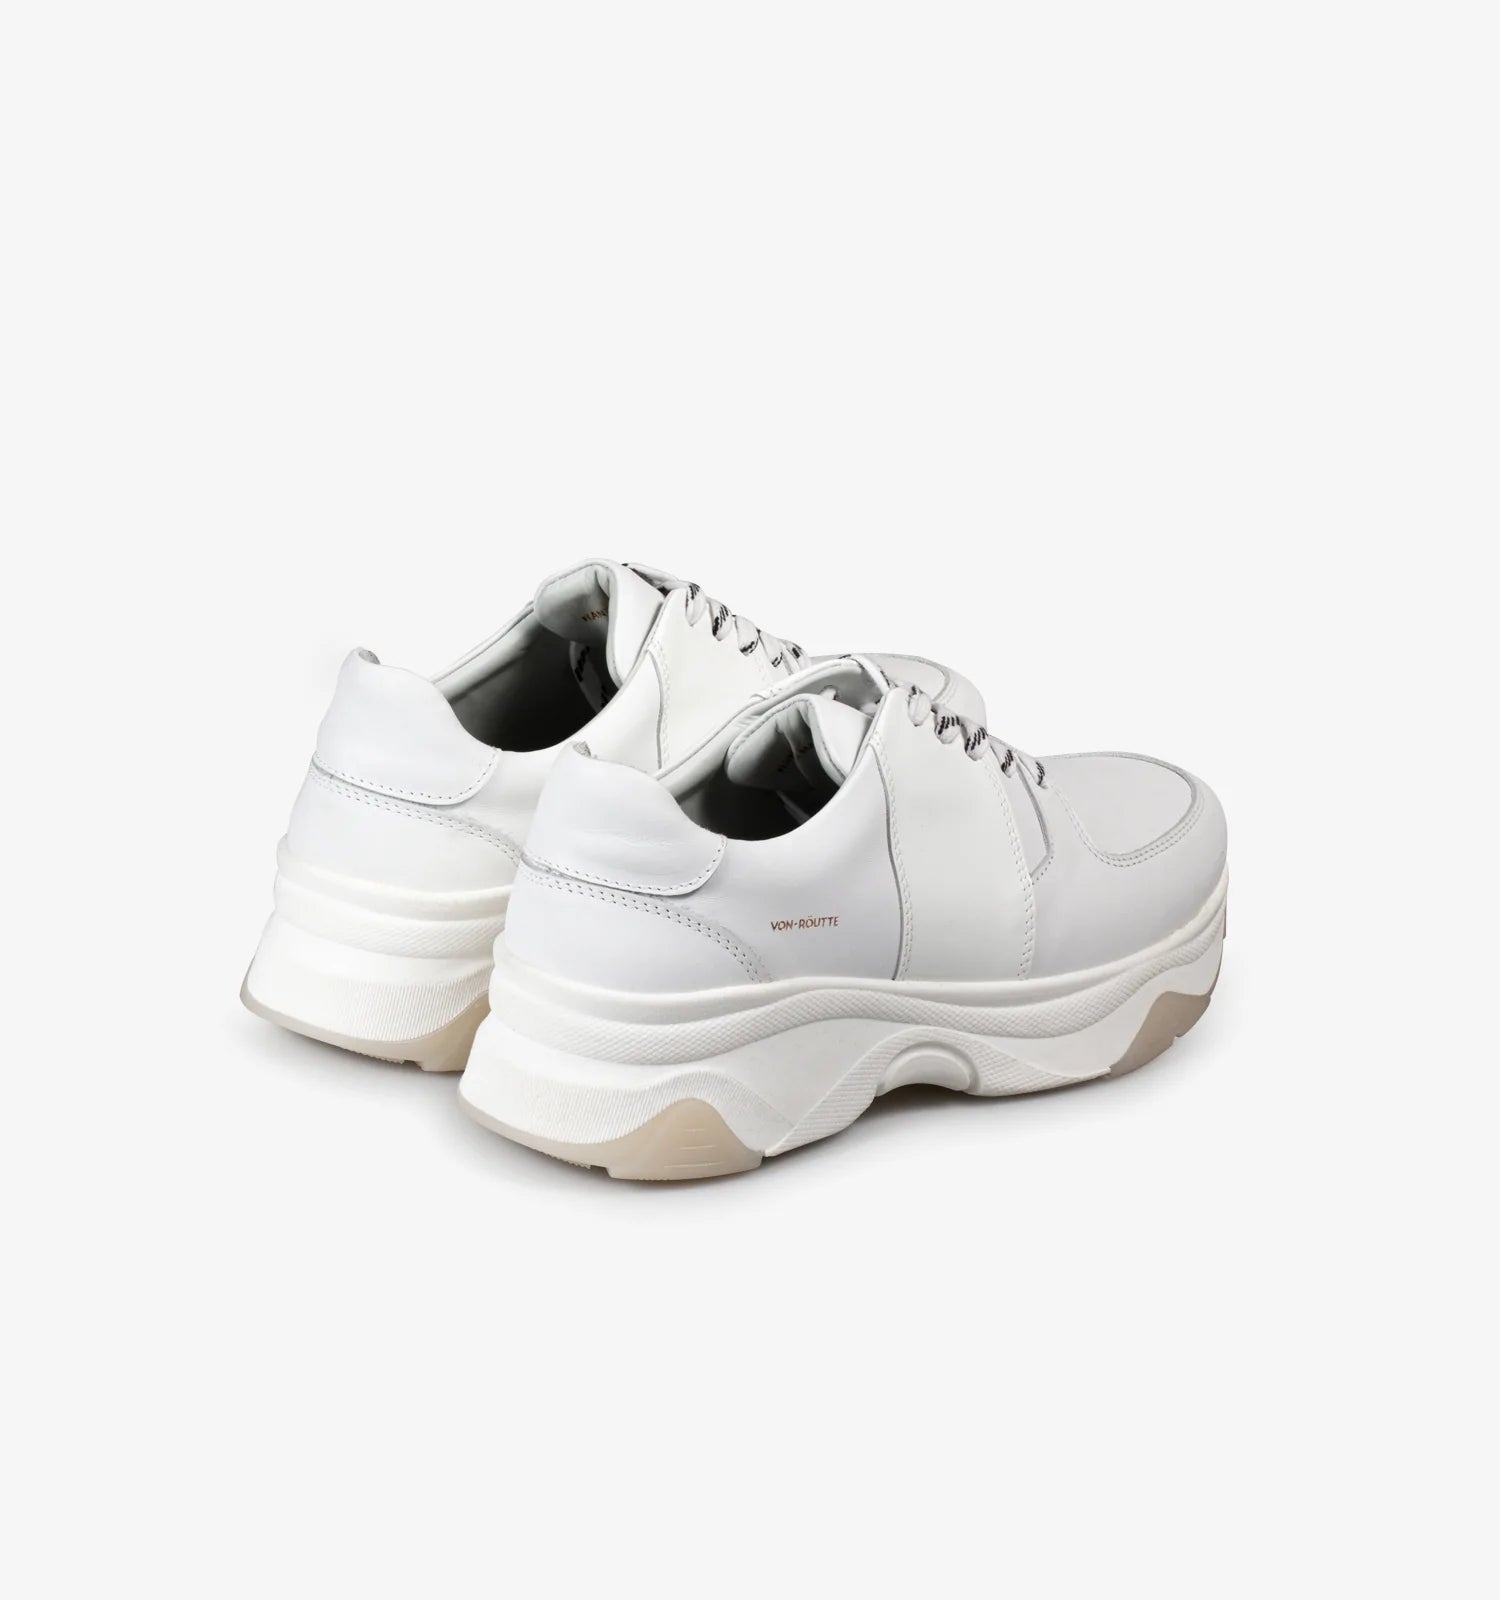 Austin Chunky Sneakers in White Patent